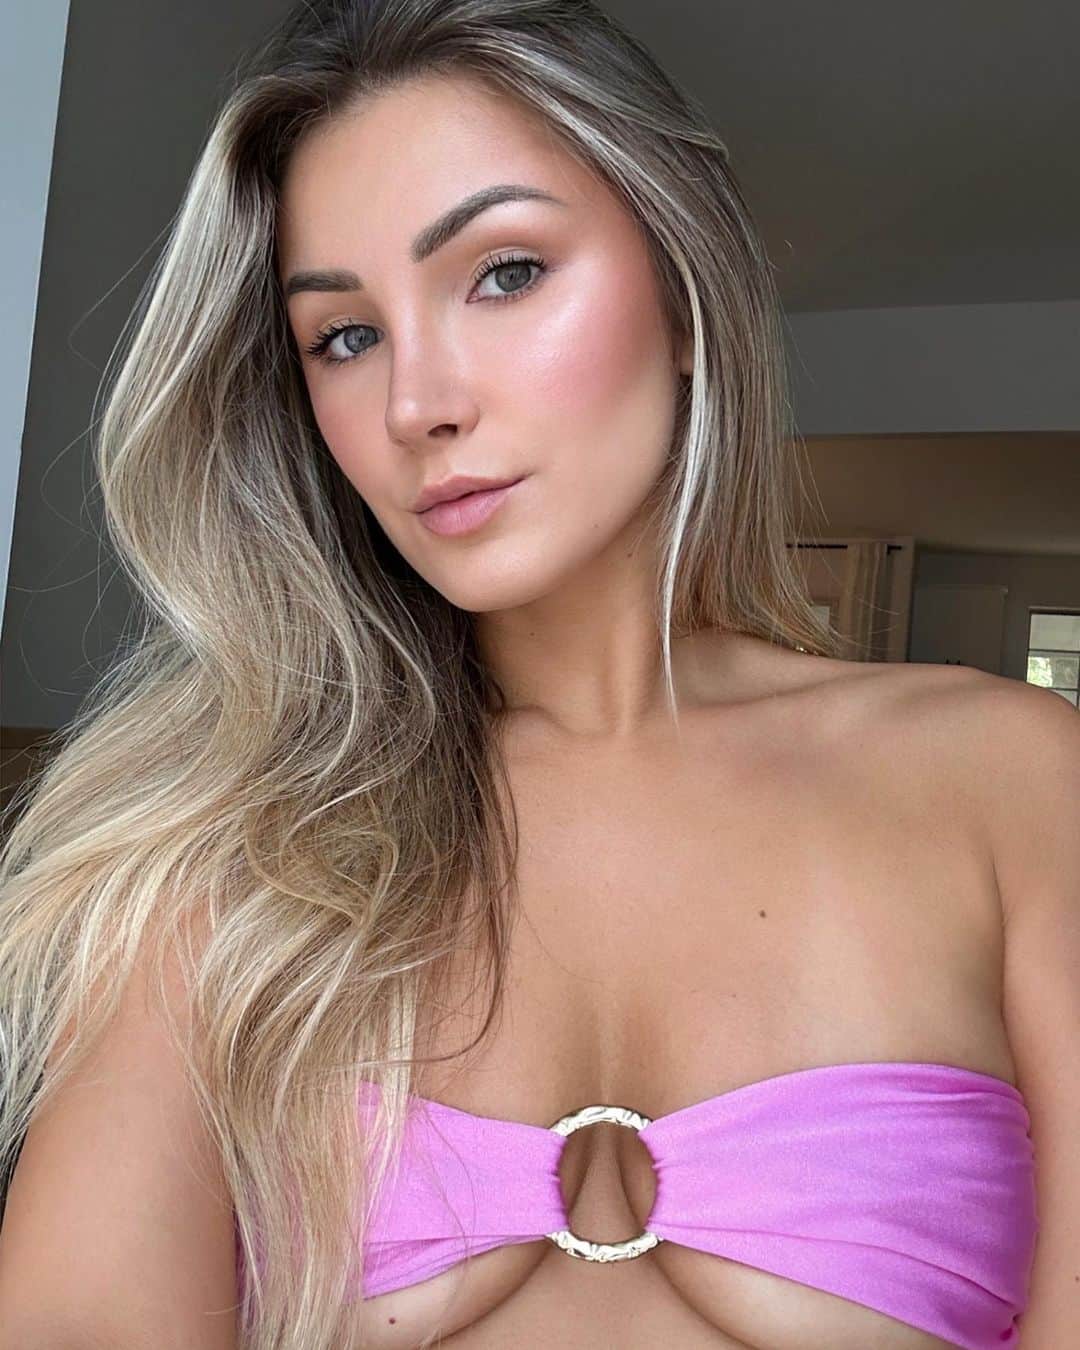 Polina Sitnovaのインスタグラム：「New beginnings 💗  Want to say the biggest thank you to @drrituchopra and @drnvplasticsurgery for helping me get my natural body back. I’m so grateful to have been in the best hands. 💞  I’m also so thankful for everyone who’s been there for me through the process, physically and emotionally. My support system is my biggest blessing. 🤍  I removed my implants in August and had a reconstructive surgery in January. I gave myself a lot of time to heal and reconnect with my body before reconnecting online. I have so much to share. Let me know if there’s anything you want to know 💕」